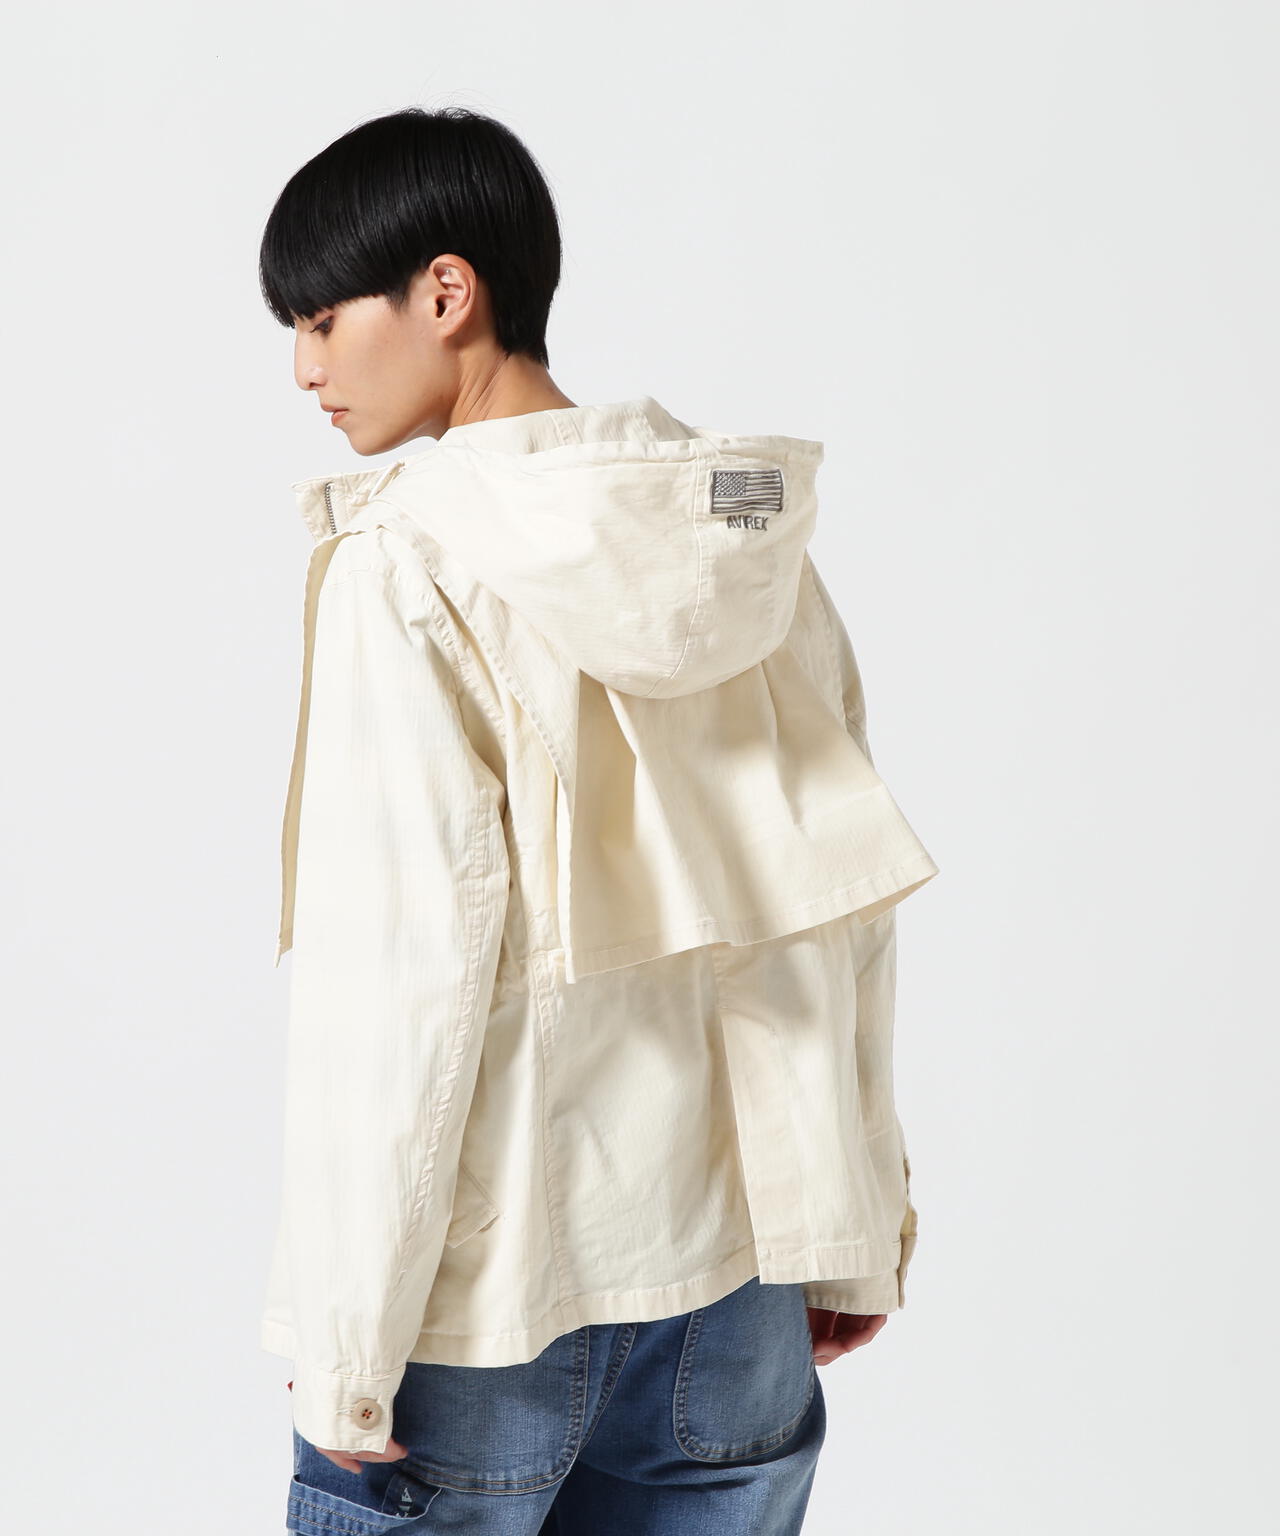 MOUNTAIN PARKA WITH THE CAPE/ マウンテンパーカー ウィズ ザ ケープ